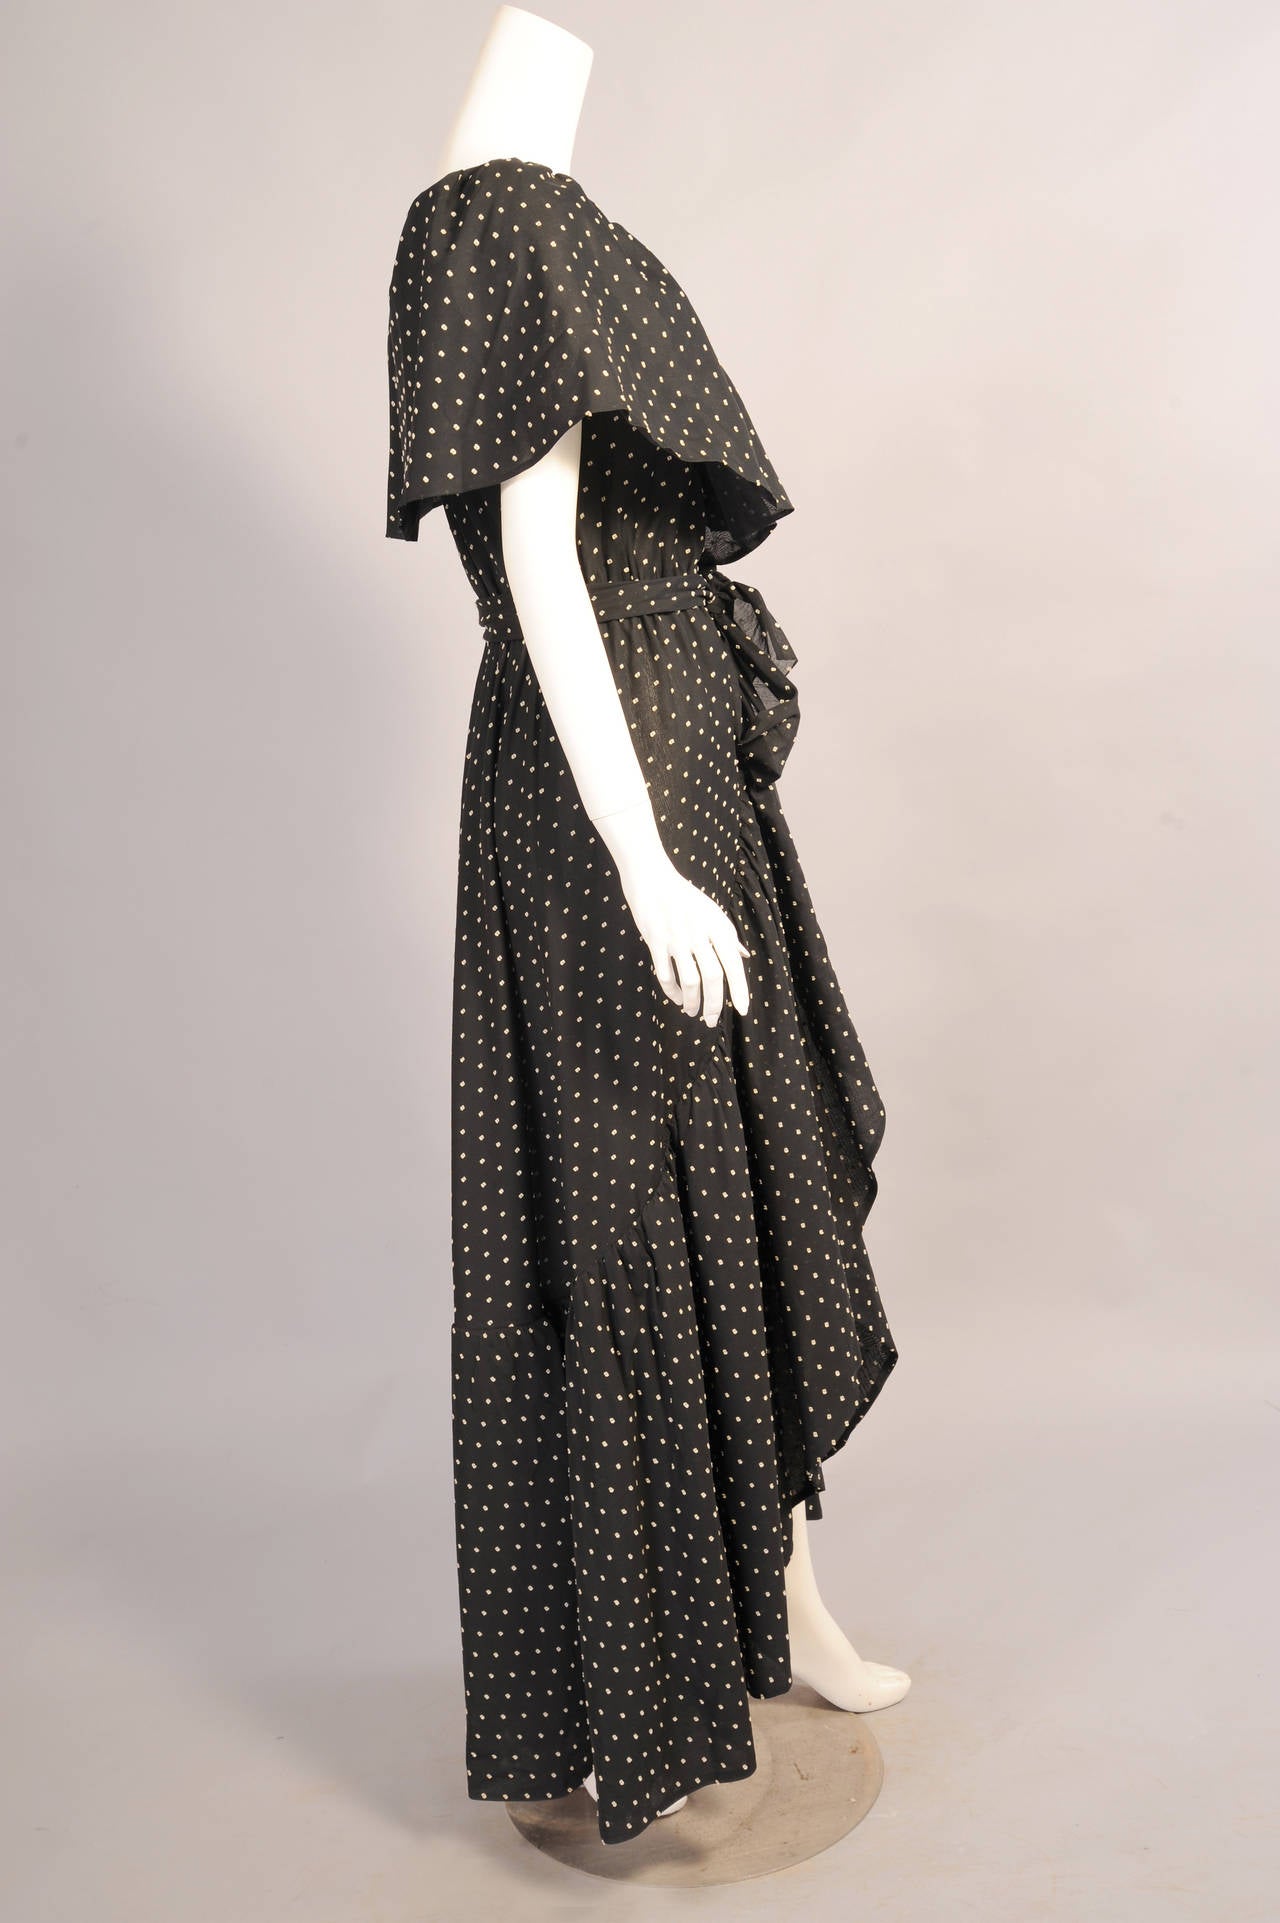 A black cotton with a white Swiss dot is used for this glamorous and sexy dress designed by Halston in the 1970's. A wide ruffle creates a cape look on the bodice of the sleeveless dress. There are hooks and eyes at the elasticized waistline and the